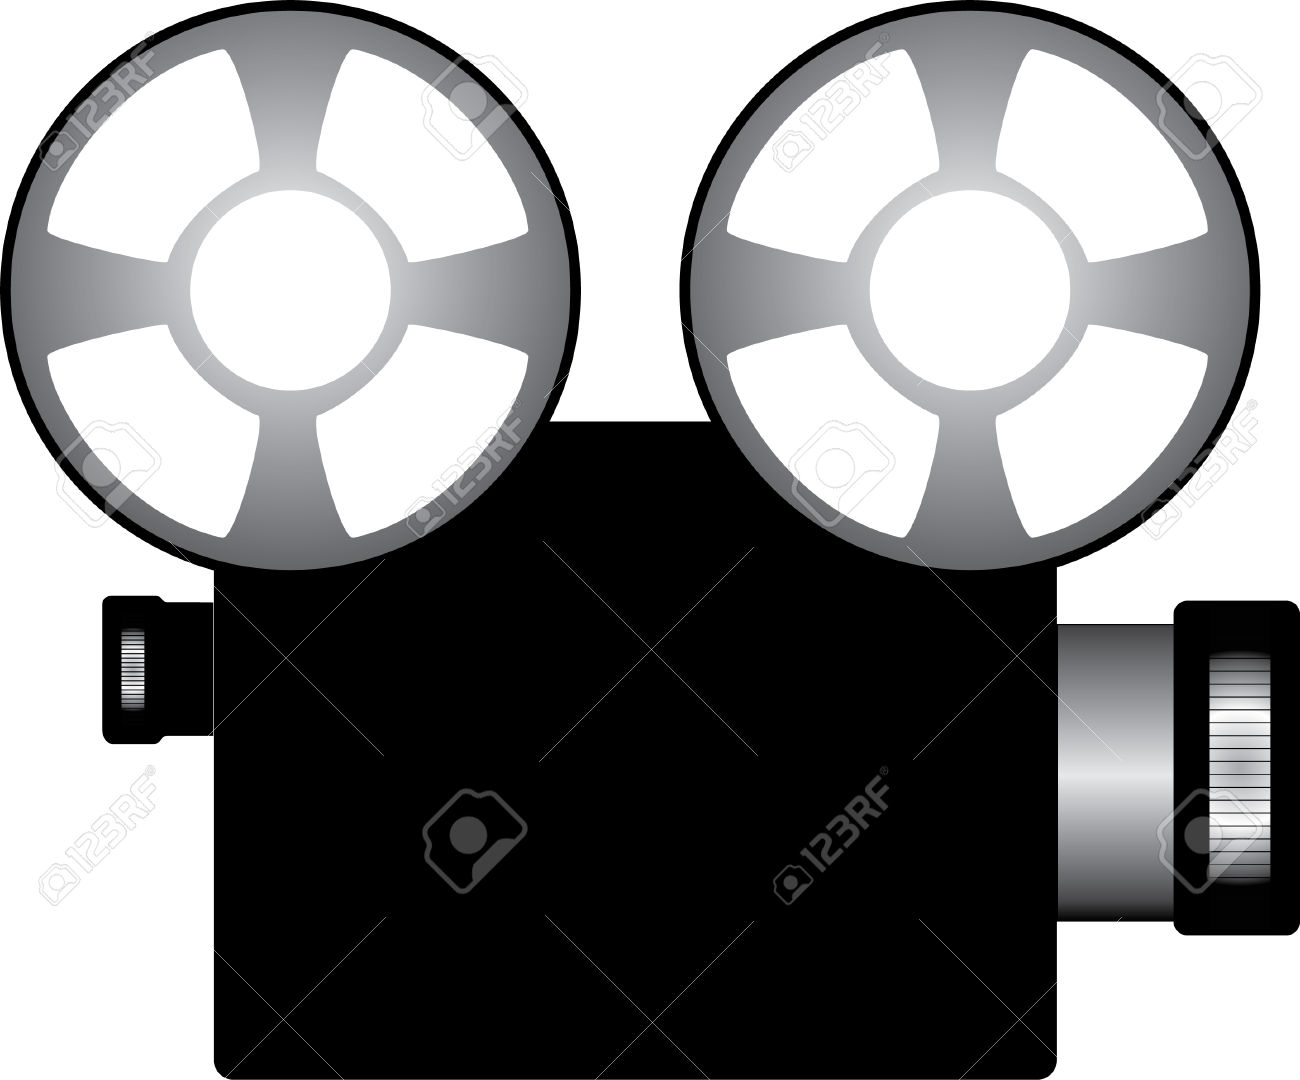 Illustration Of A Film Projector Royalty Free Cliparts, Vectors.